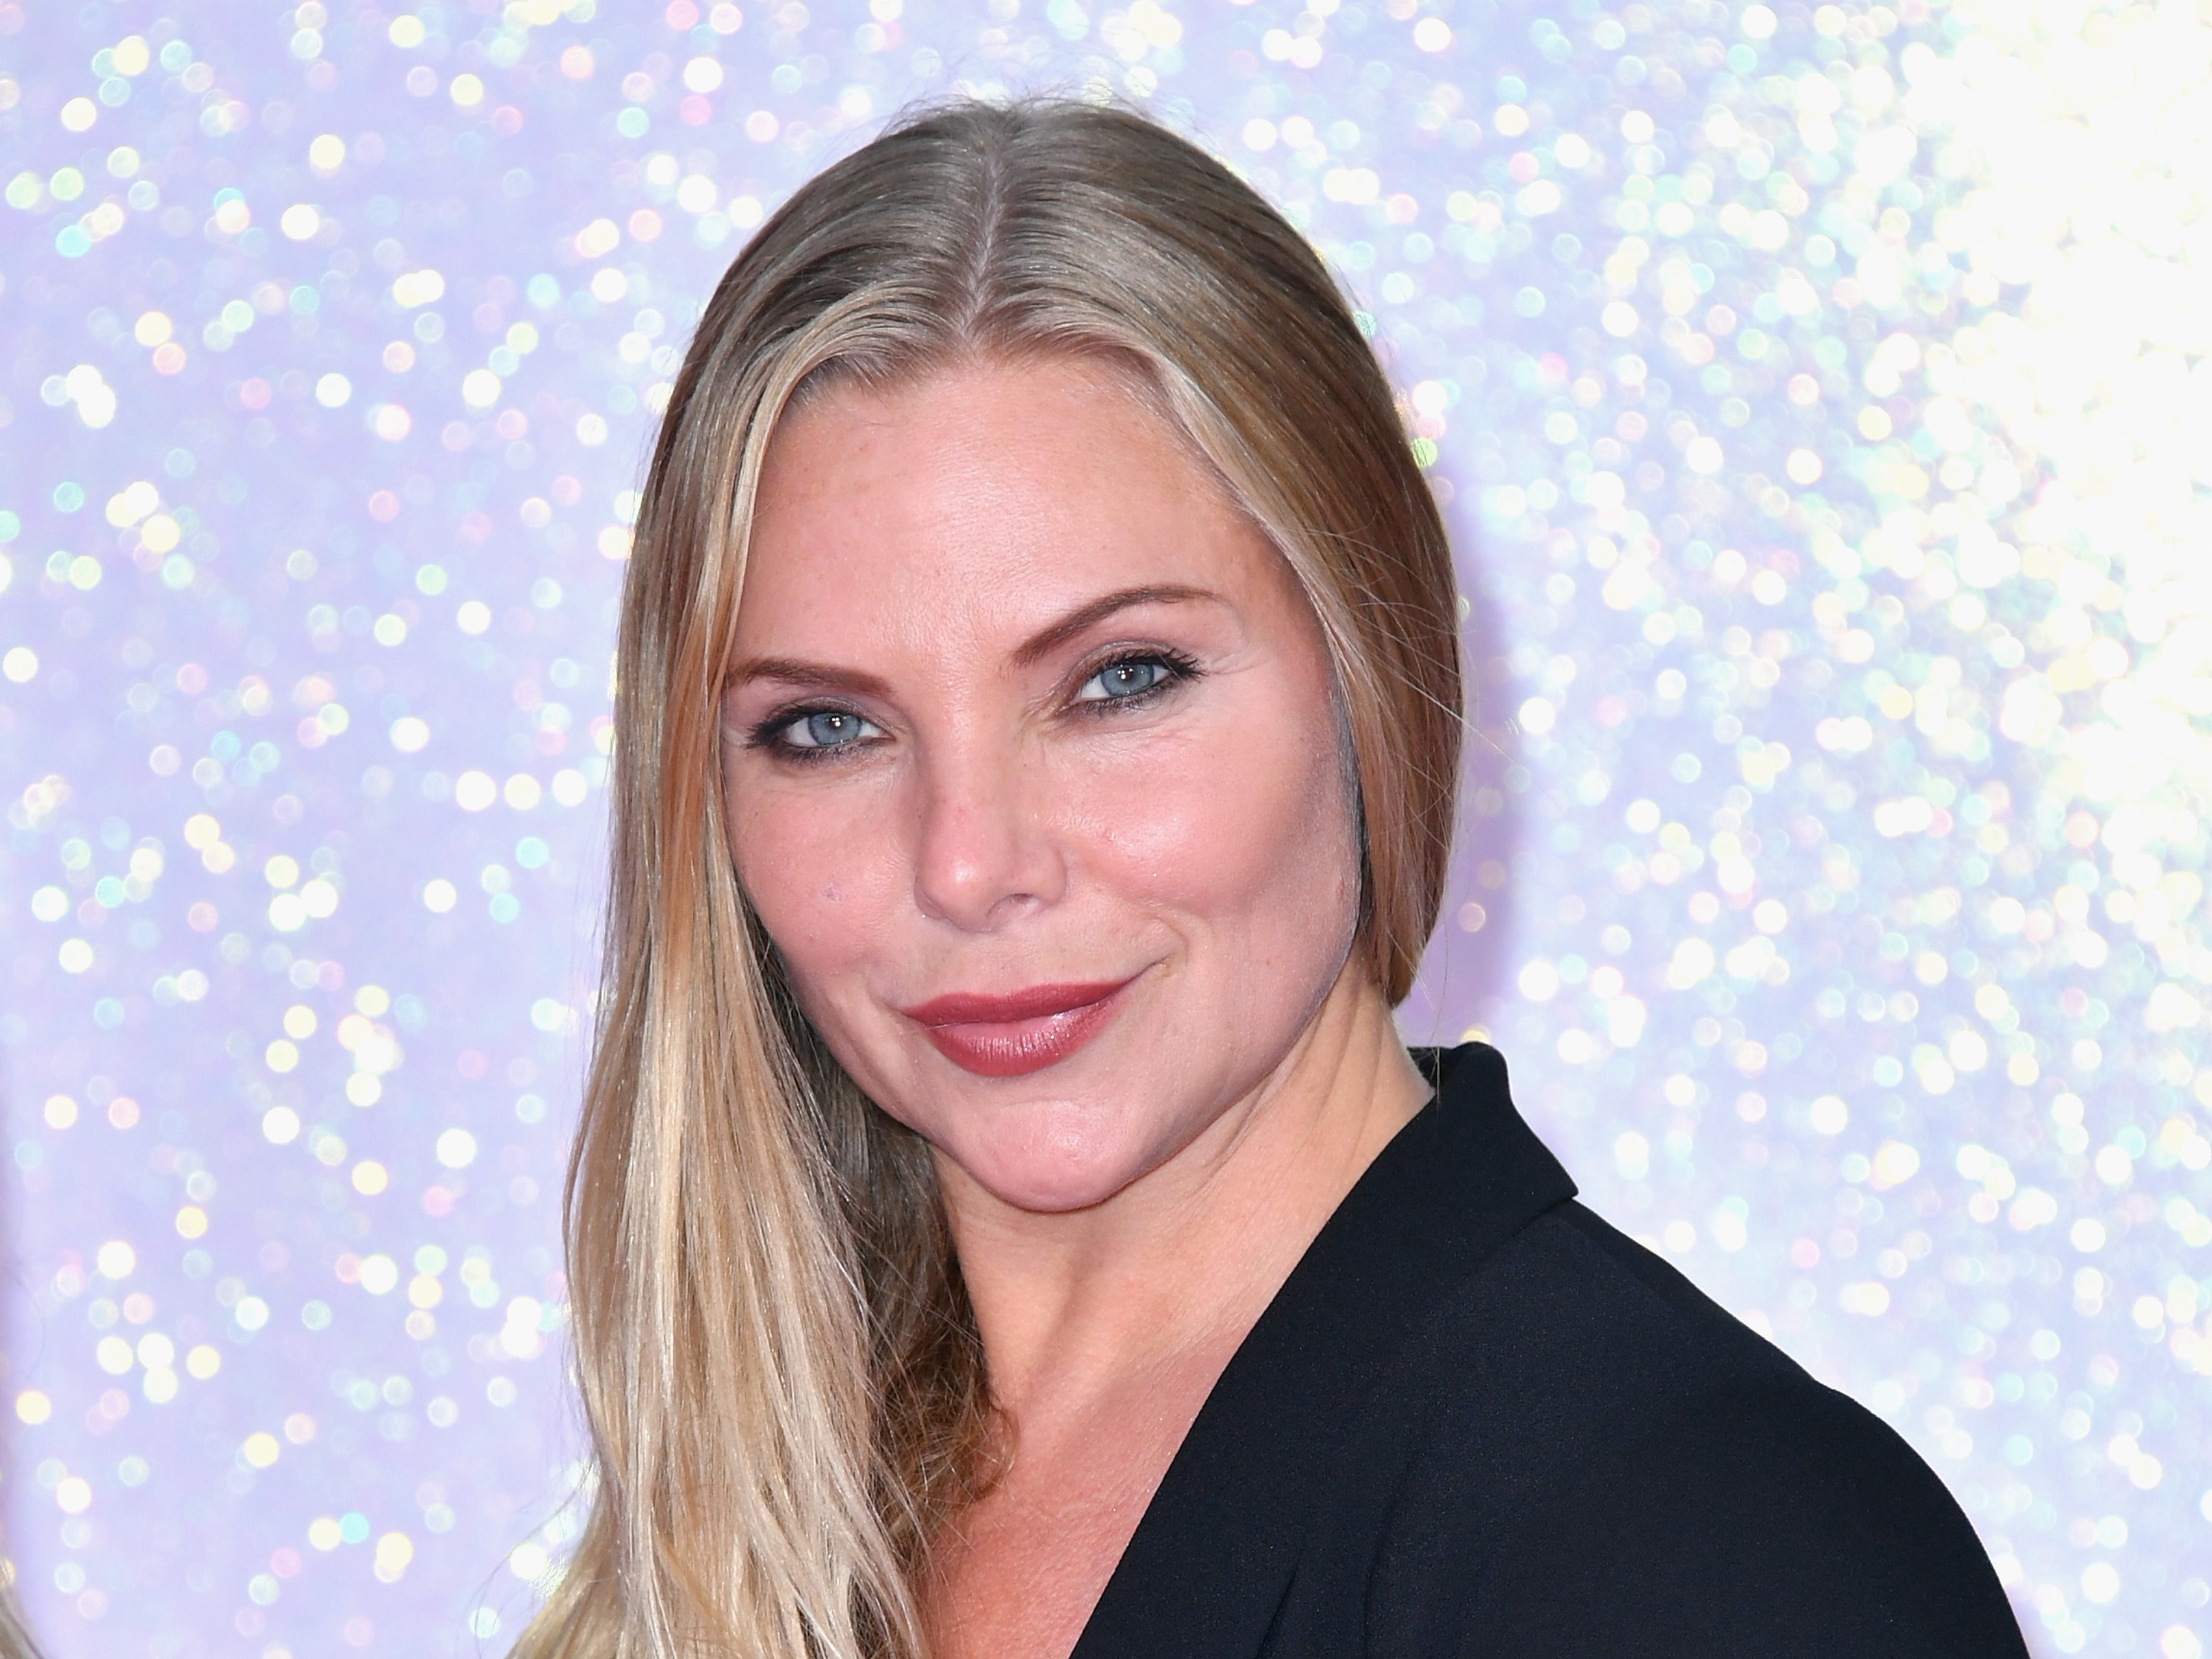 Samantha Womack revealed the diagnosis in August